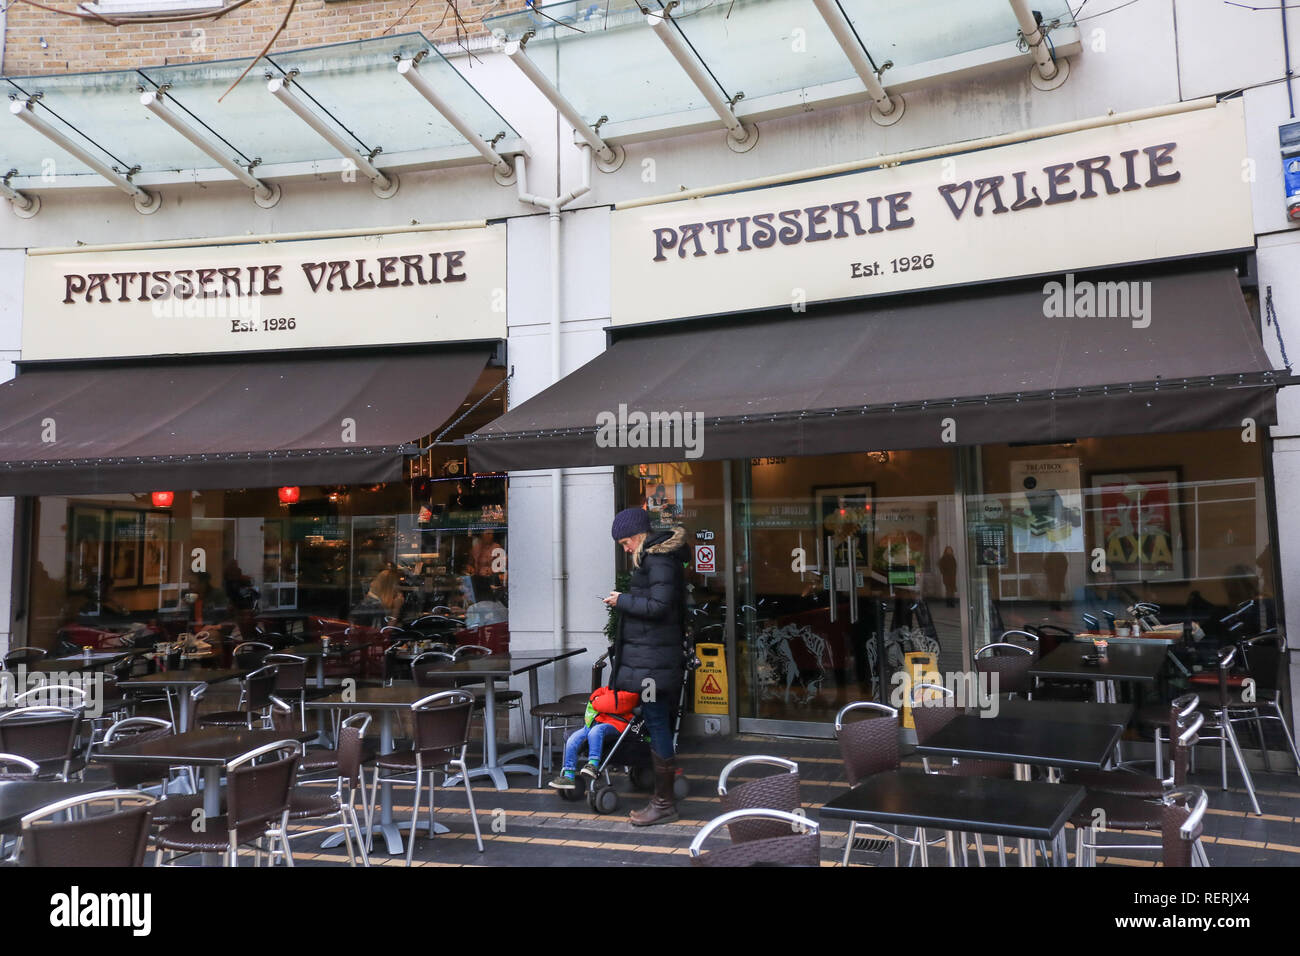 London UK. 23rd January 2019. A Patisserie Valerie chain in Wimbledon High Street. Patisserie Valerie has fallen into administration putting more than 3,000 jobs at risk as the cafe chain is plunged into crisis after a £40m black hole was discovered in its accounts Credit: amer ghazzal/Alamy Live News Stock Photo